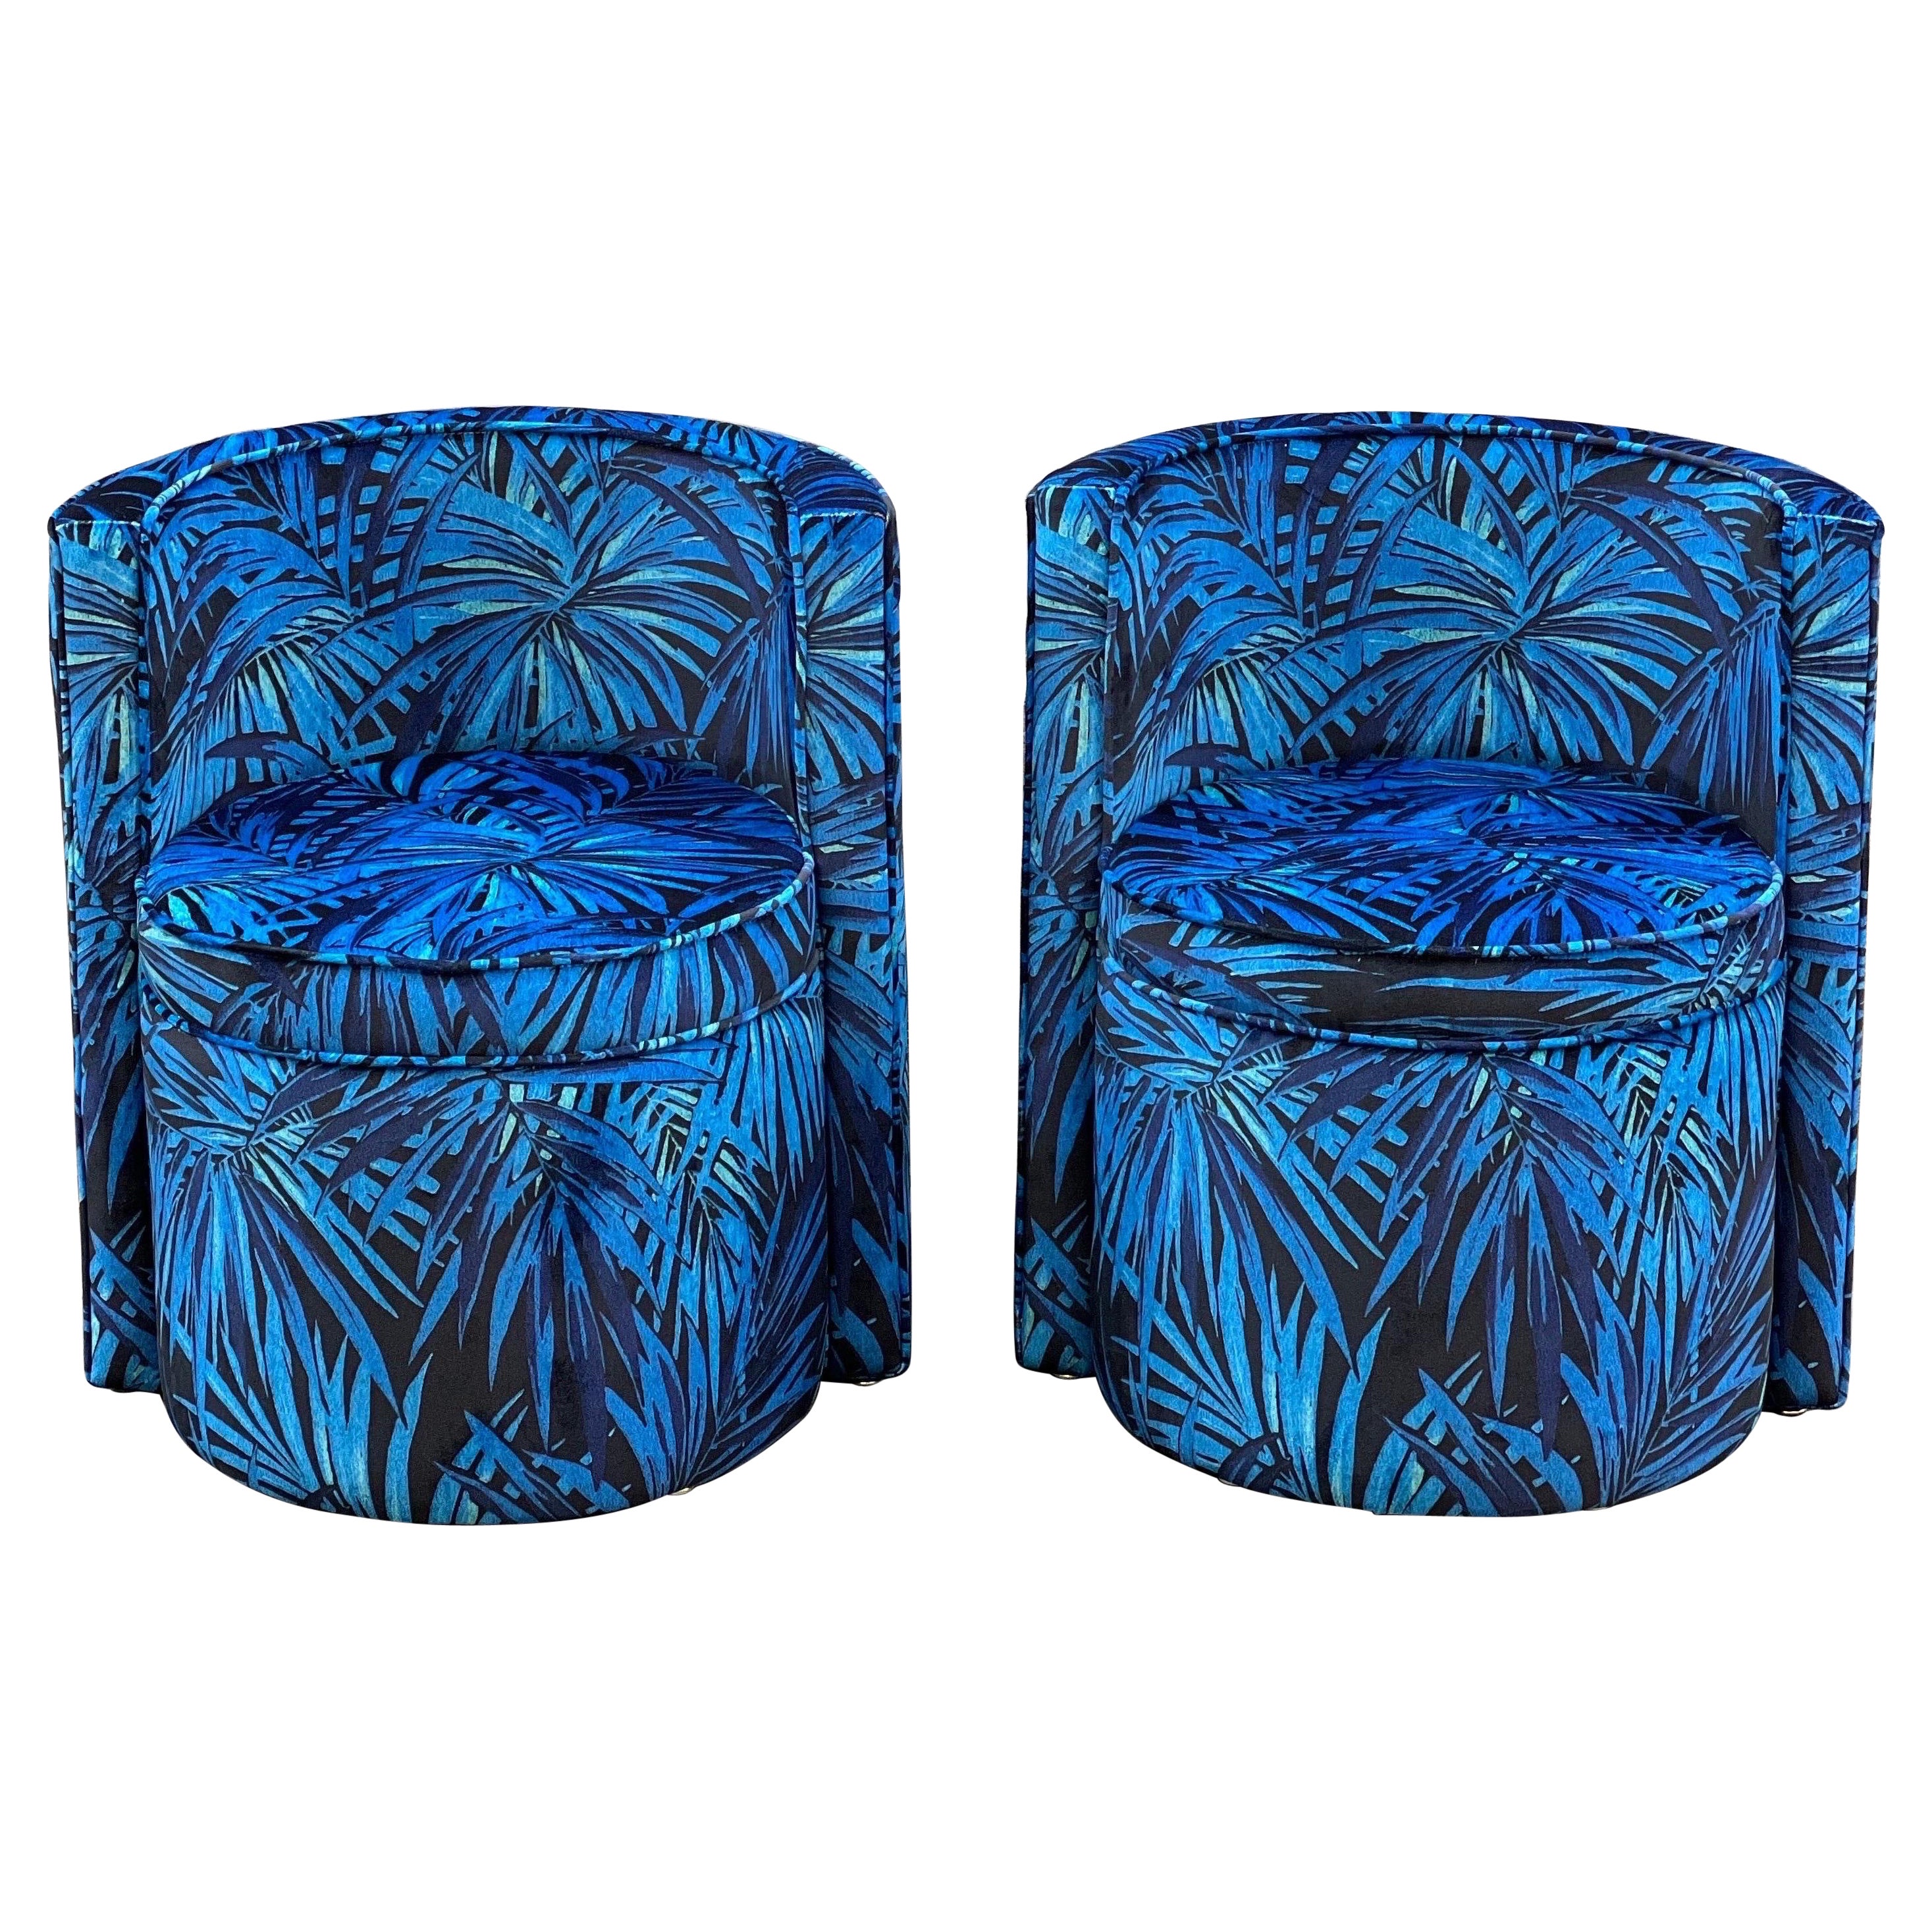 Pair of Upholstered  Armchairs  with Floral Velvet in Shades of Blue  1980